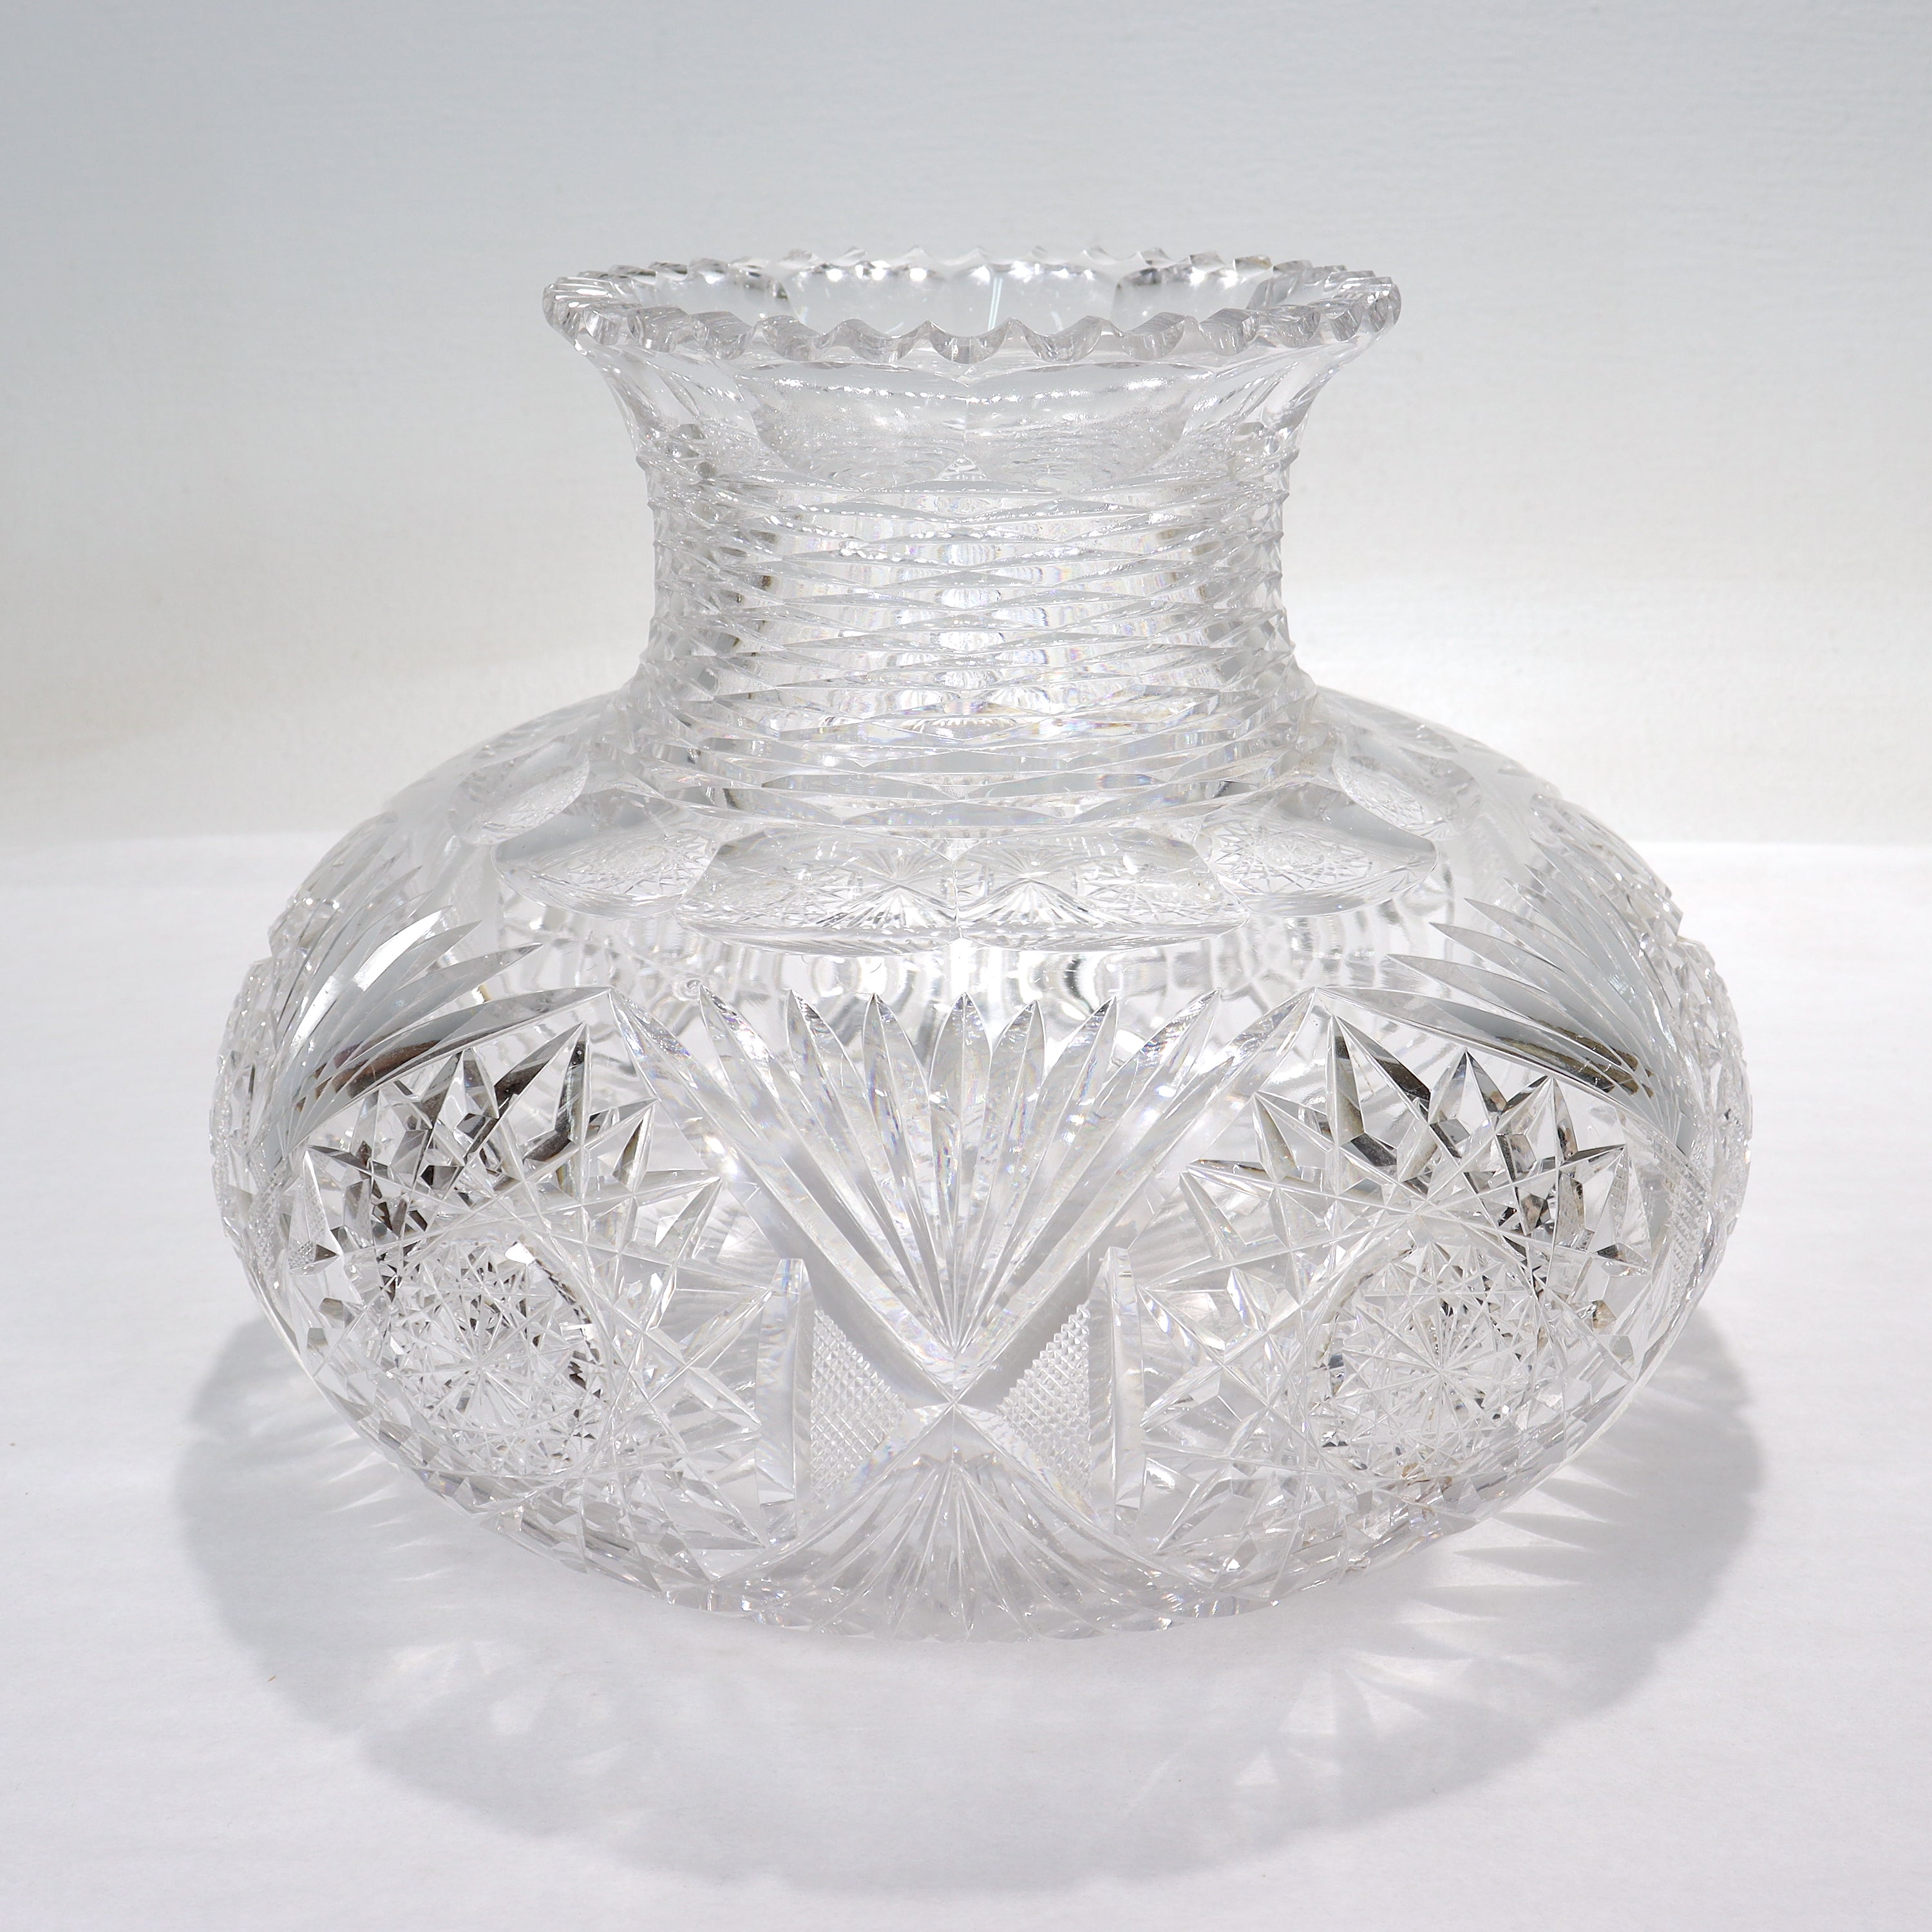 A fine antique American Brilliant Period cut glass vase.

In the form of a large squat vase.

With cut sunburst pattern decoration on both the base and circumference, and a scalloped rim. 

Simply a lovely, large ABP vase!

Date:
Late 19th